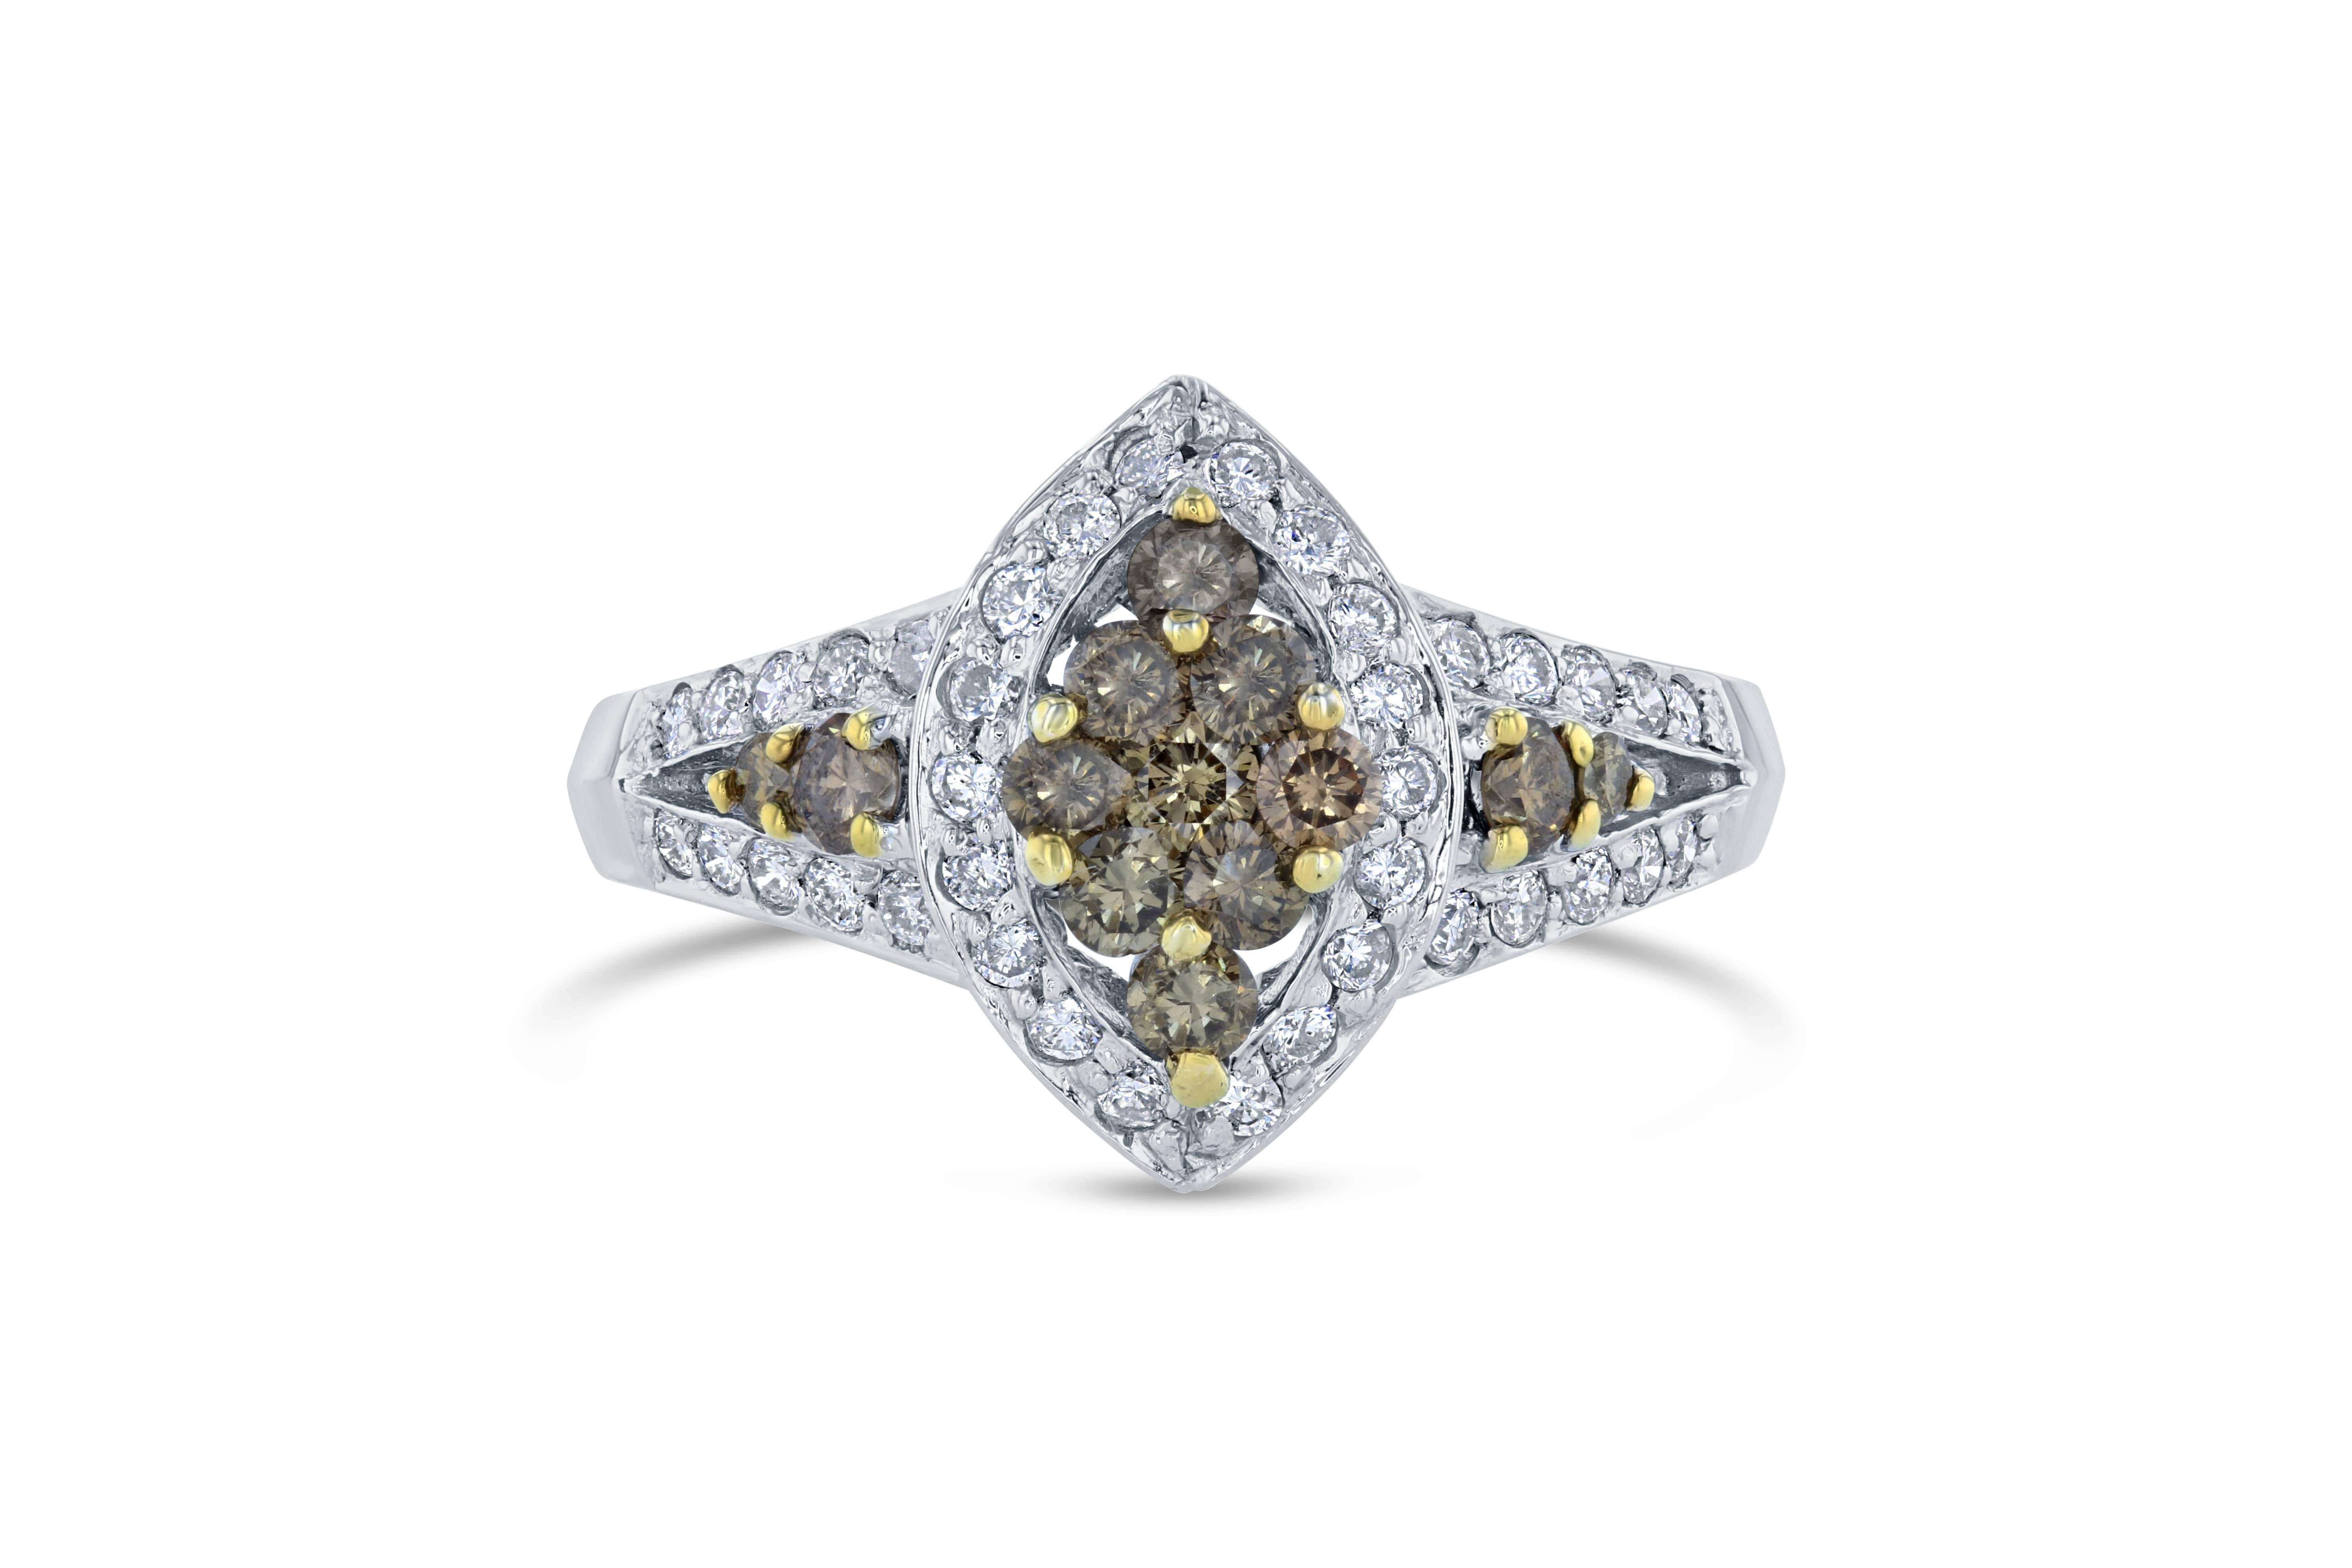 This is a unique looking fancy diamond cluster ring.

There are 13 natural and fancy colored brown round cut diamonds that weigh 0.65 carat and there are 38 white round cut diamonds that weigh 0.40 carat. 

The Cluster setting is crafted in 14K